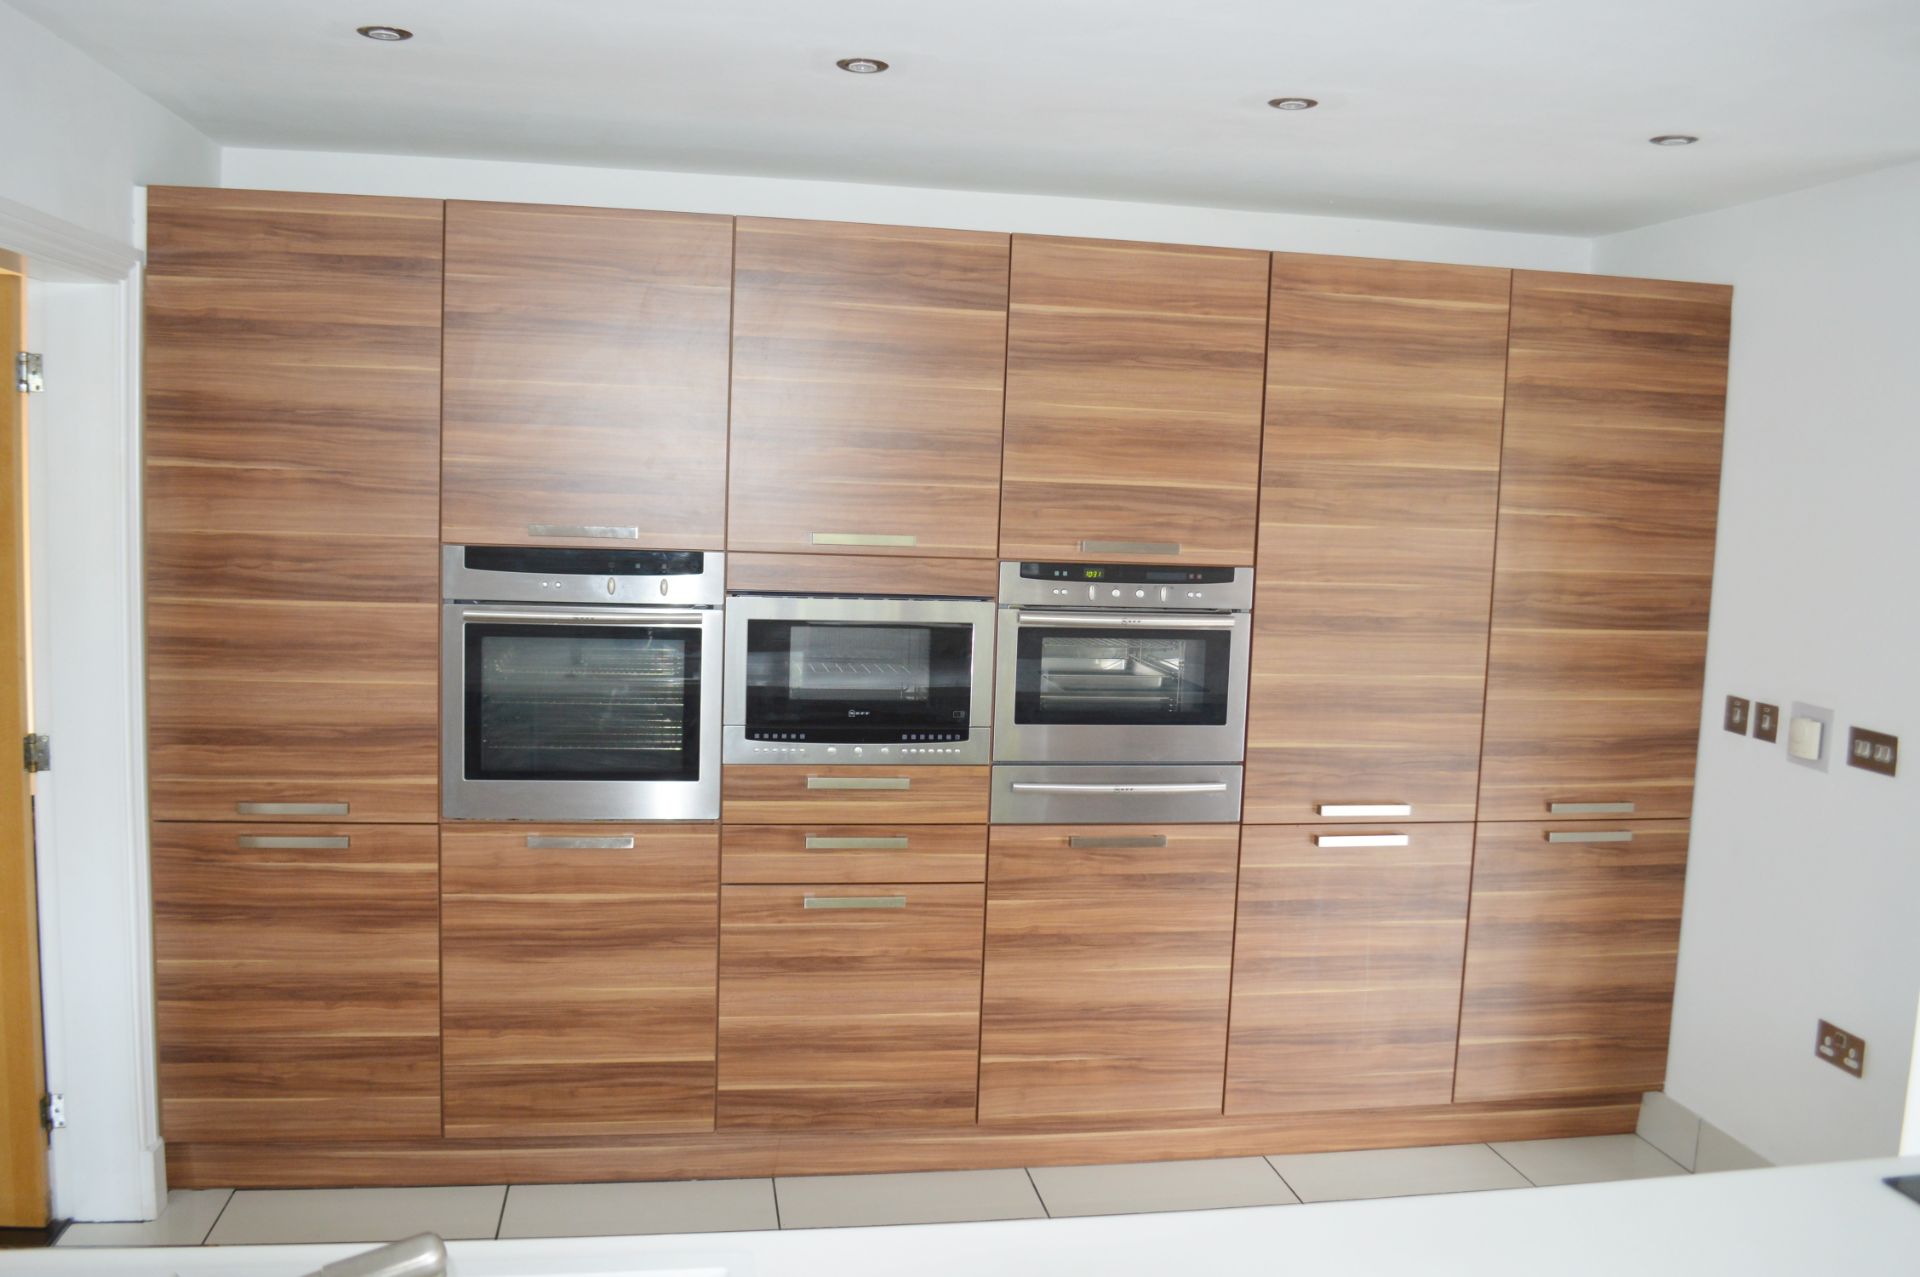 1 x Contemporary Bespoke Fitted Kitchen With Neff Branded Appliances - Collection Date: 1st November - Image 36 of 52